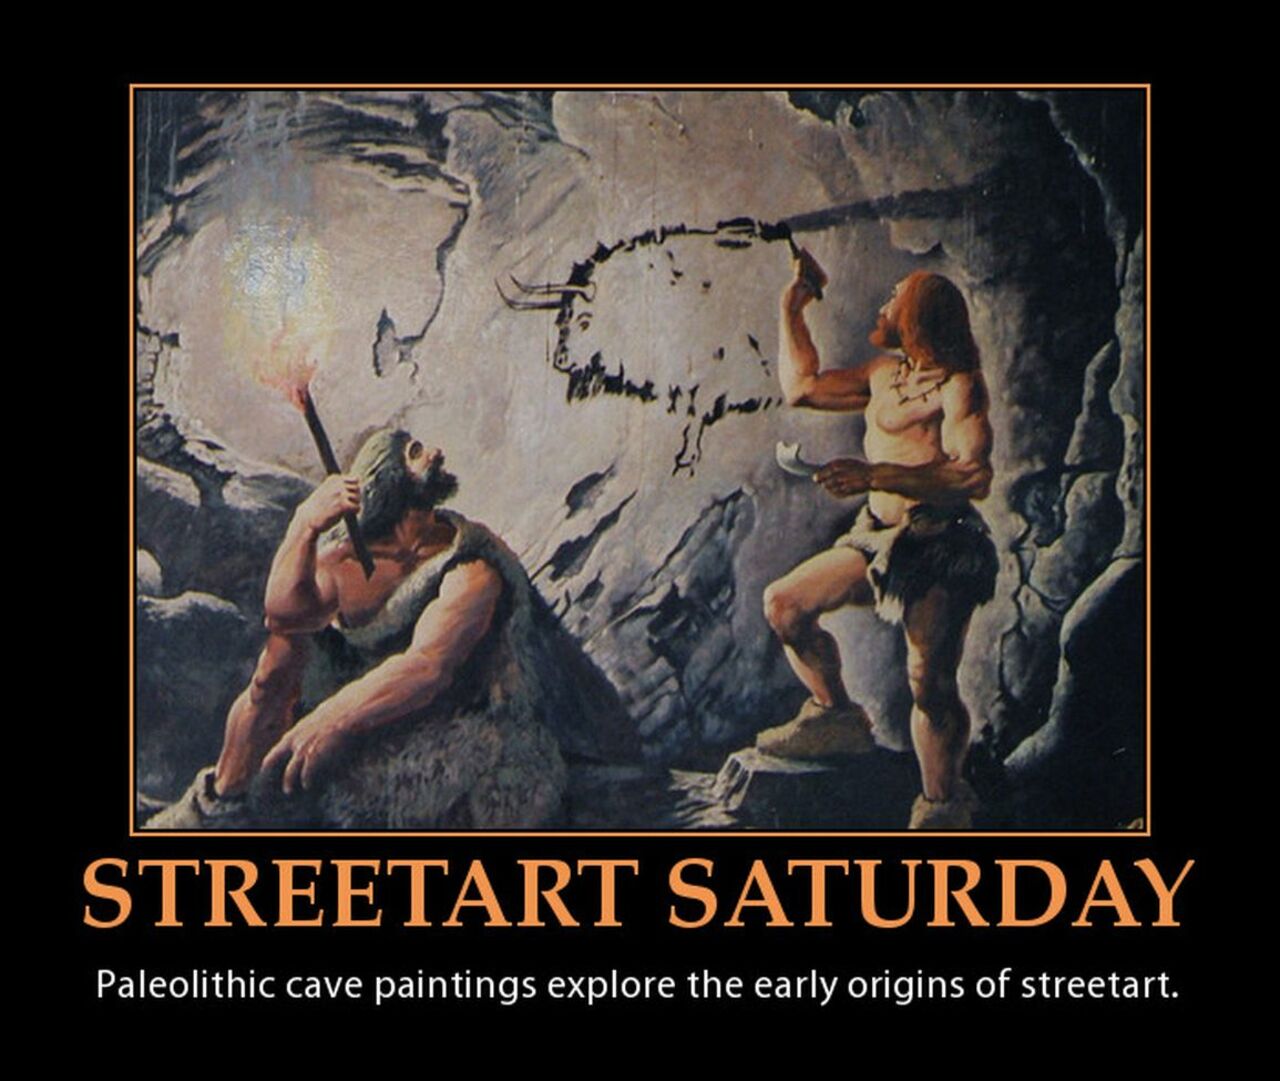 #StreetartSaturday I've always thought of #CavePaintings as the very early beginnings of #Streetart https://t.co/C41E8dIagv